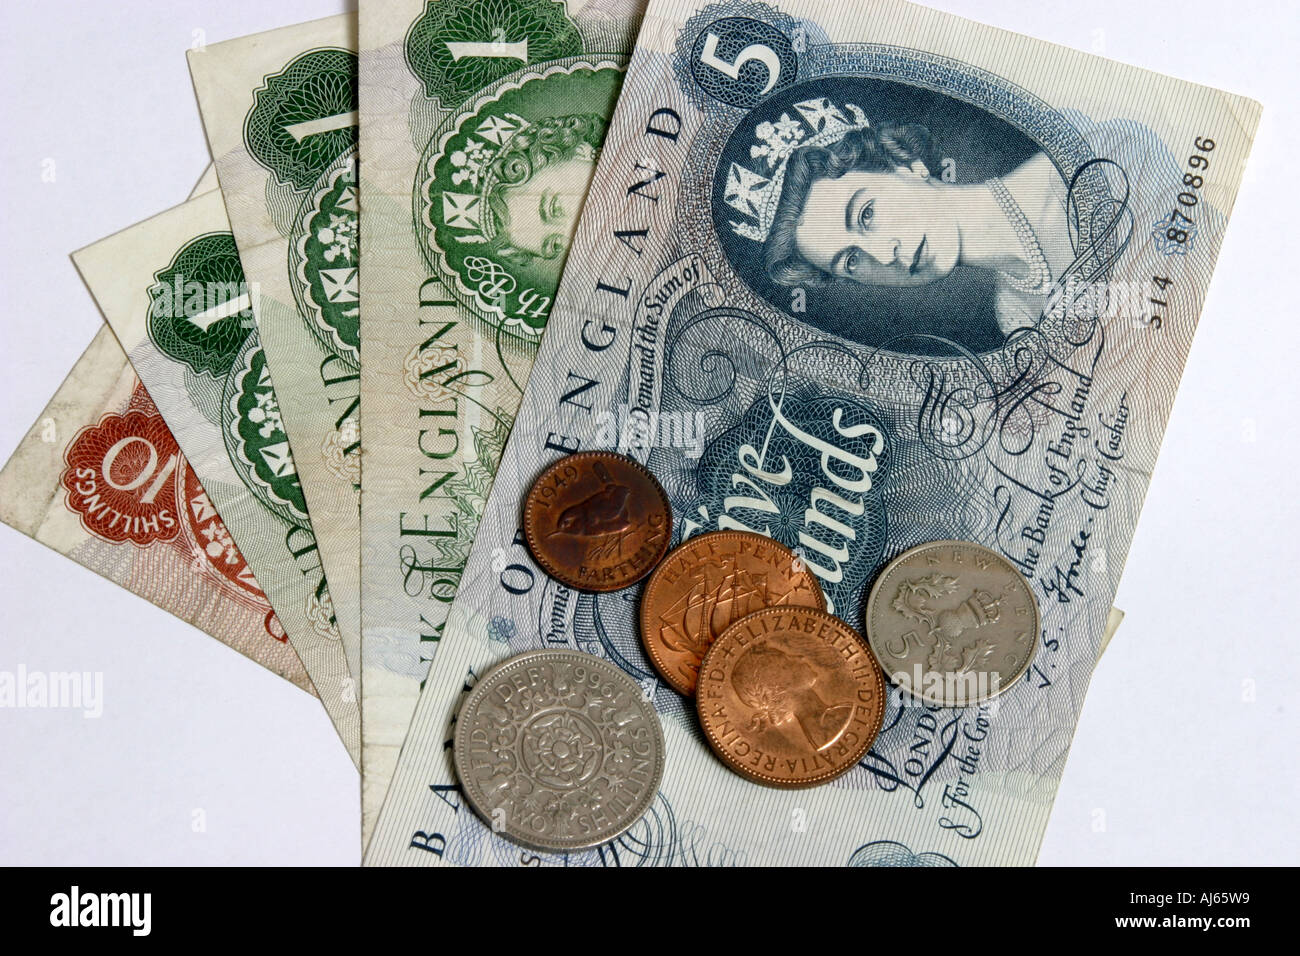 Old English notes and coins from the sixties and seventies. Stock Photo